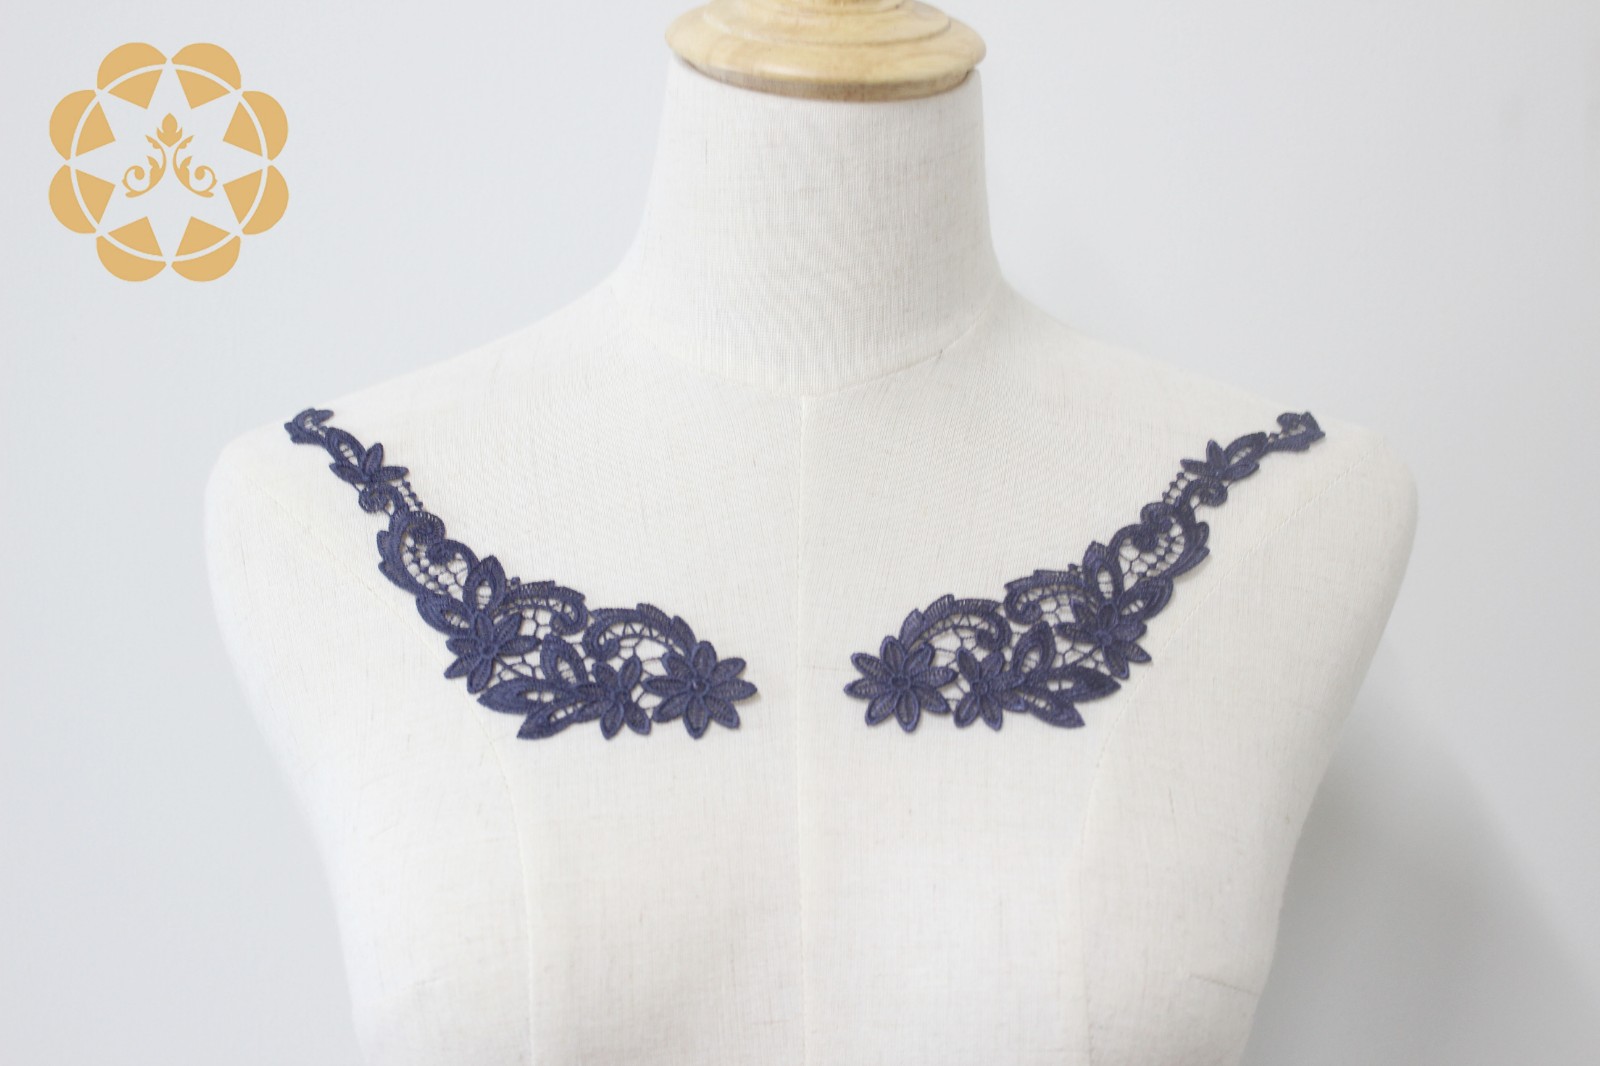 Winsunemb -Embroidered Motif Embroidered Floral Collar Applique Lace Neckline-1